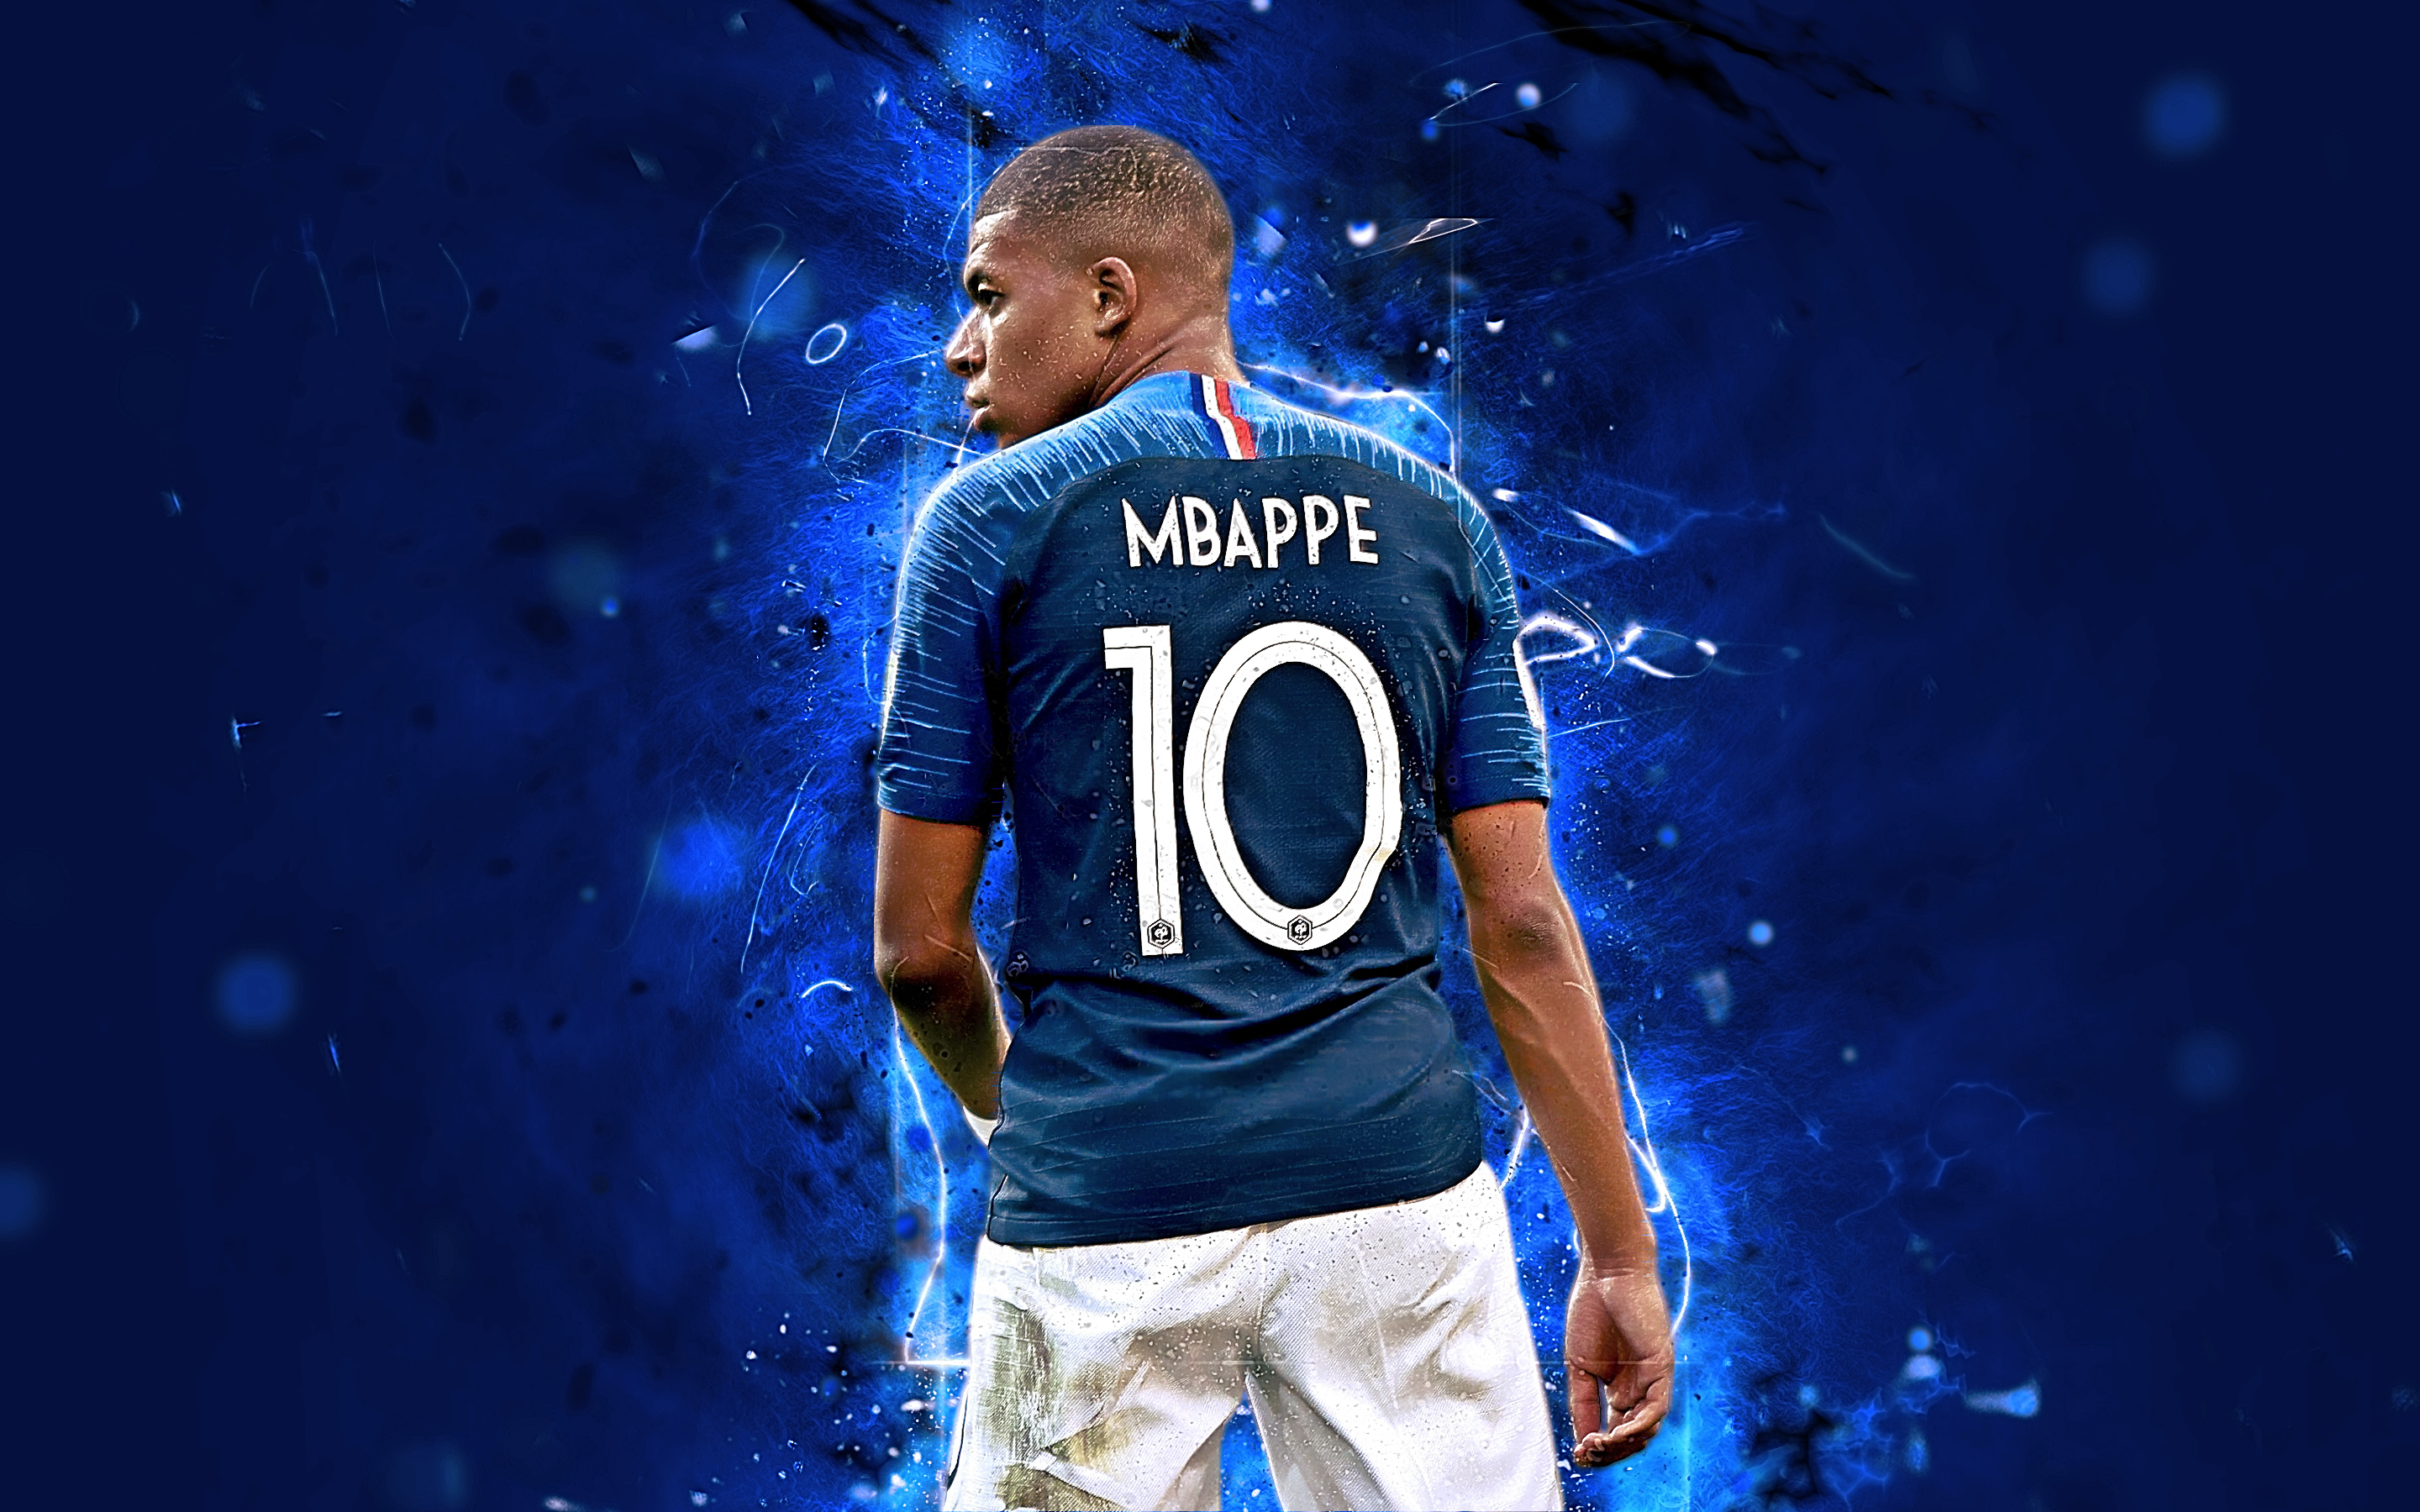 Download Kylian Mbappé wallpapers for mobile phone, free Kylian Mbappé HD pictures